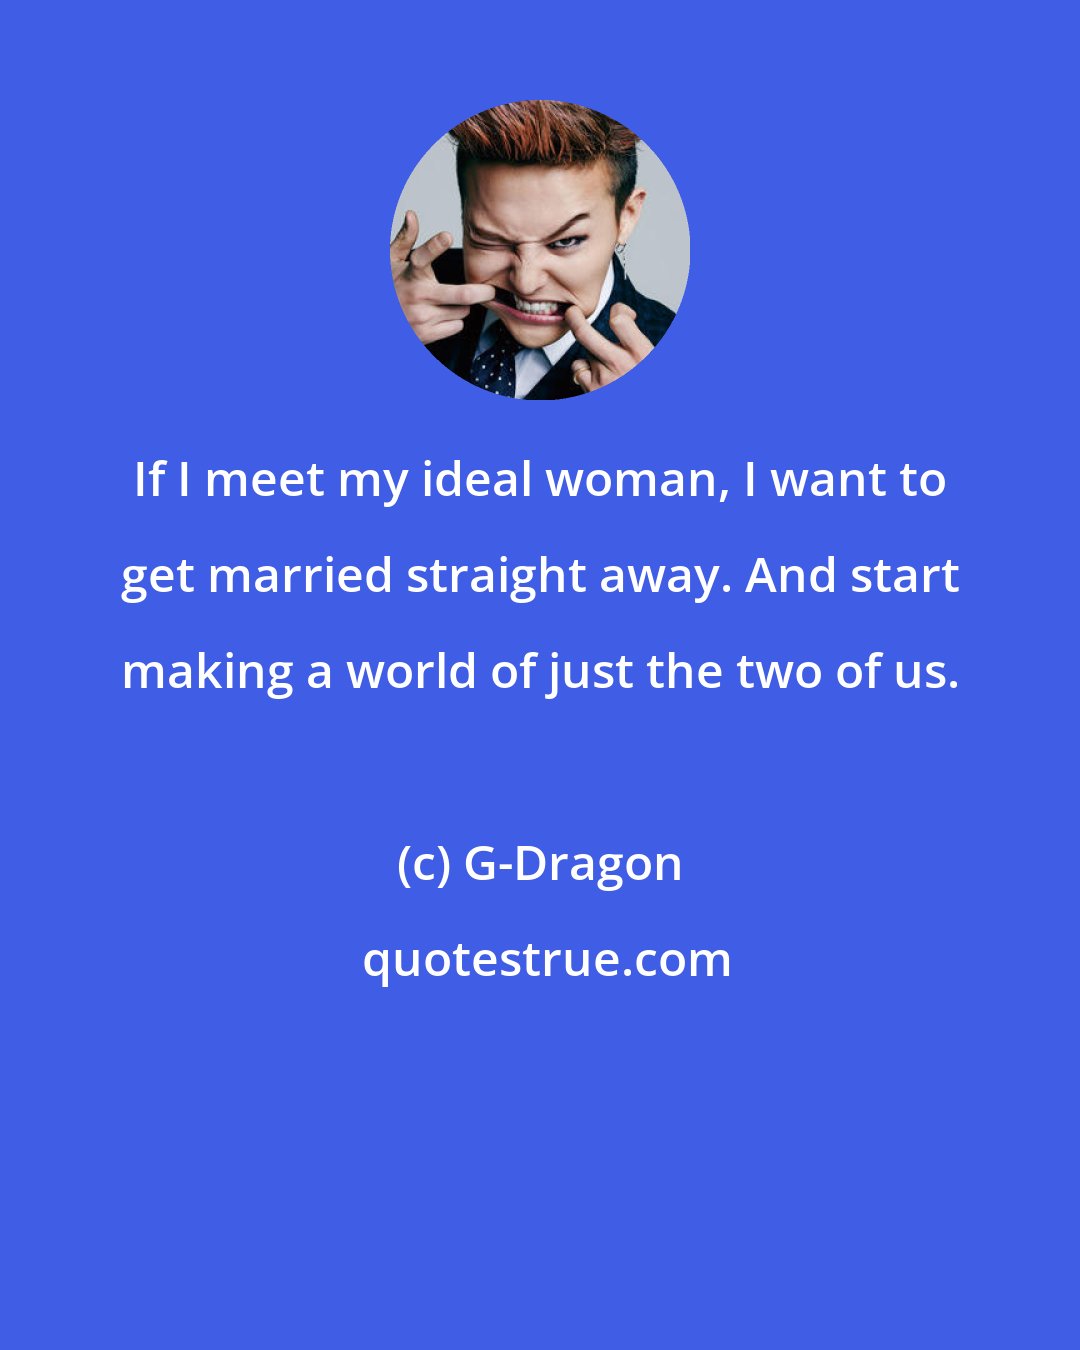 G-Dragon: If I meet my ideal woman, I want to get married straight away. And start making a world of just the two of us.